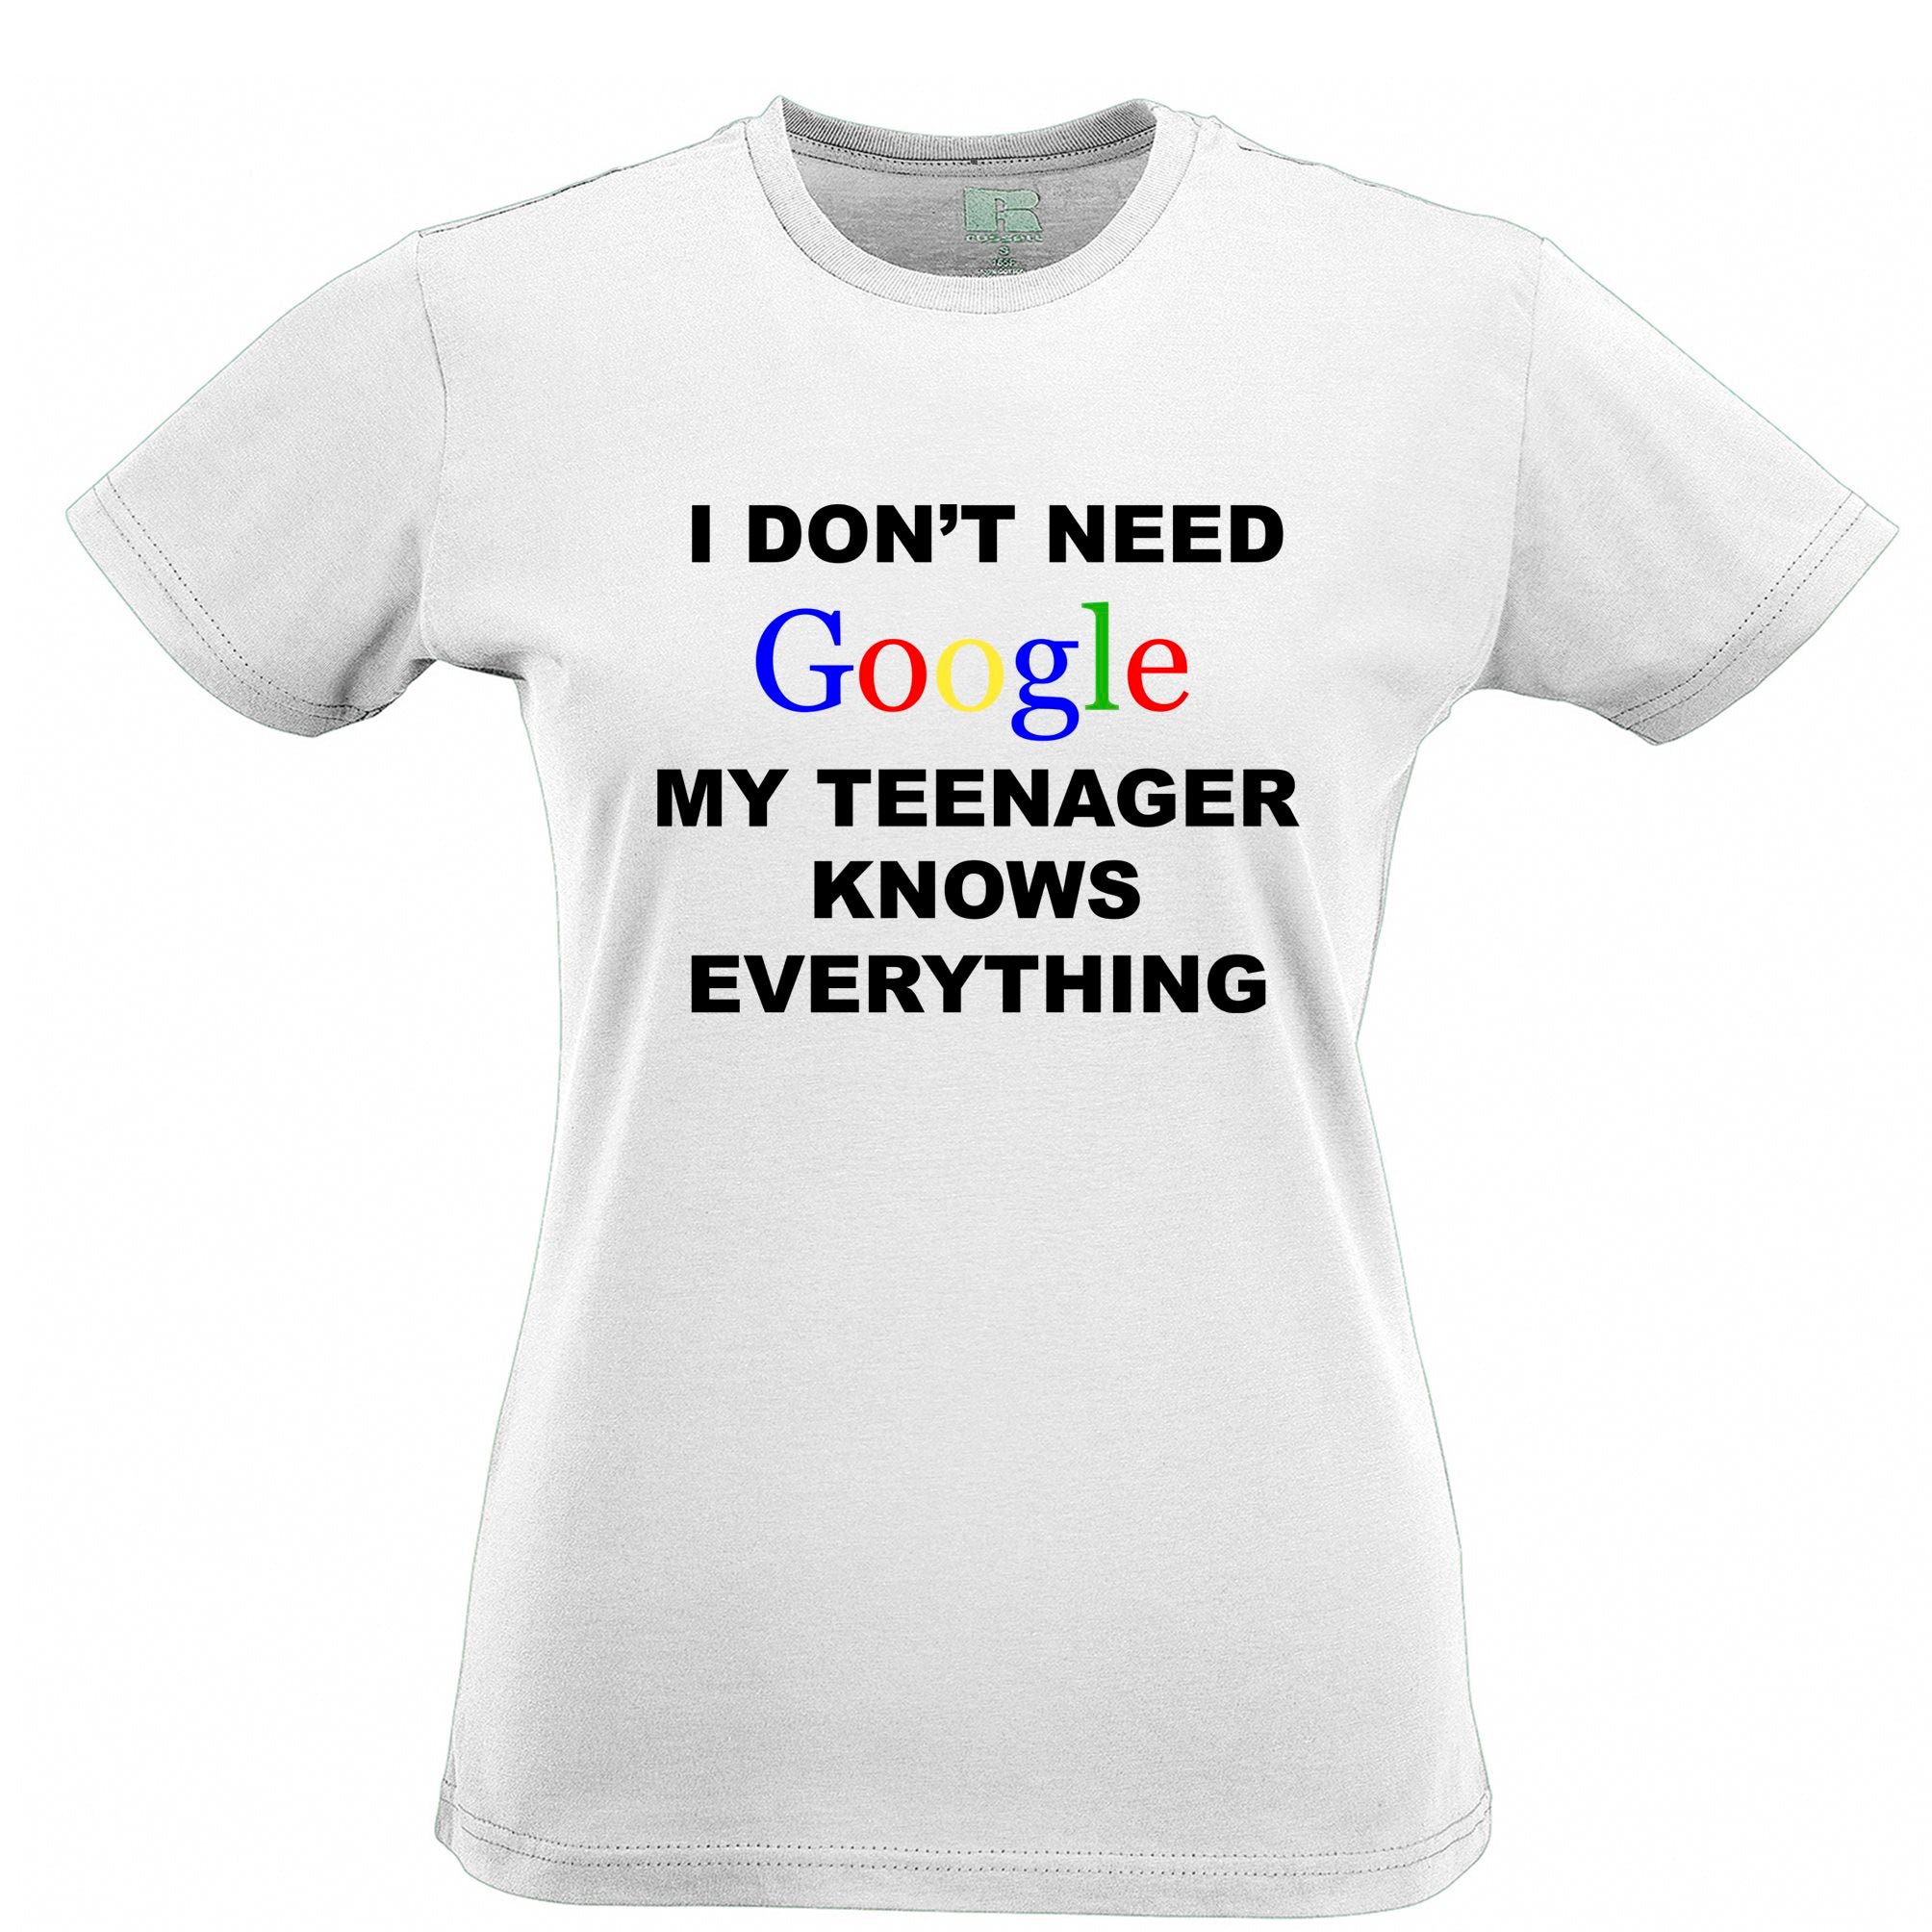 I Don't Need Google Womens T Shirt Teenager Knows Everything